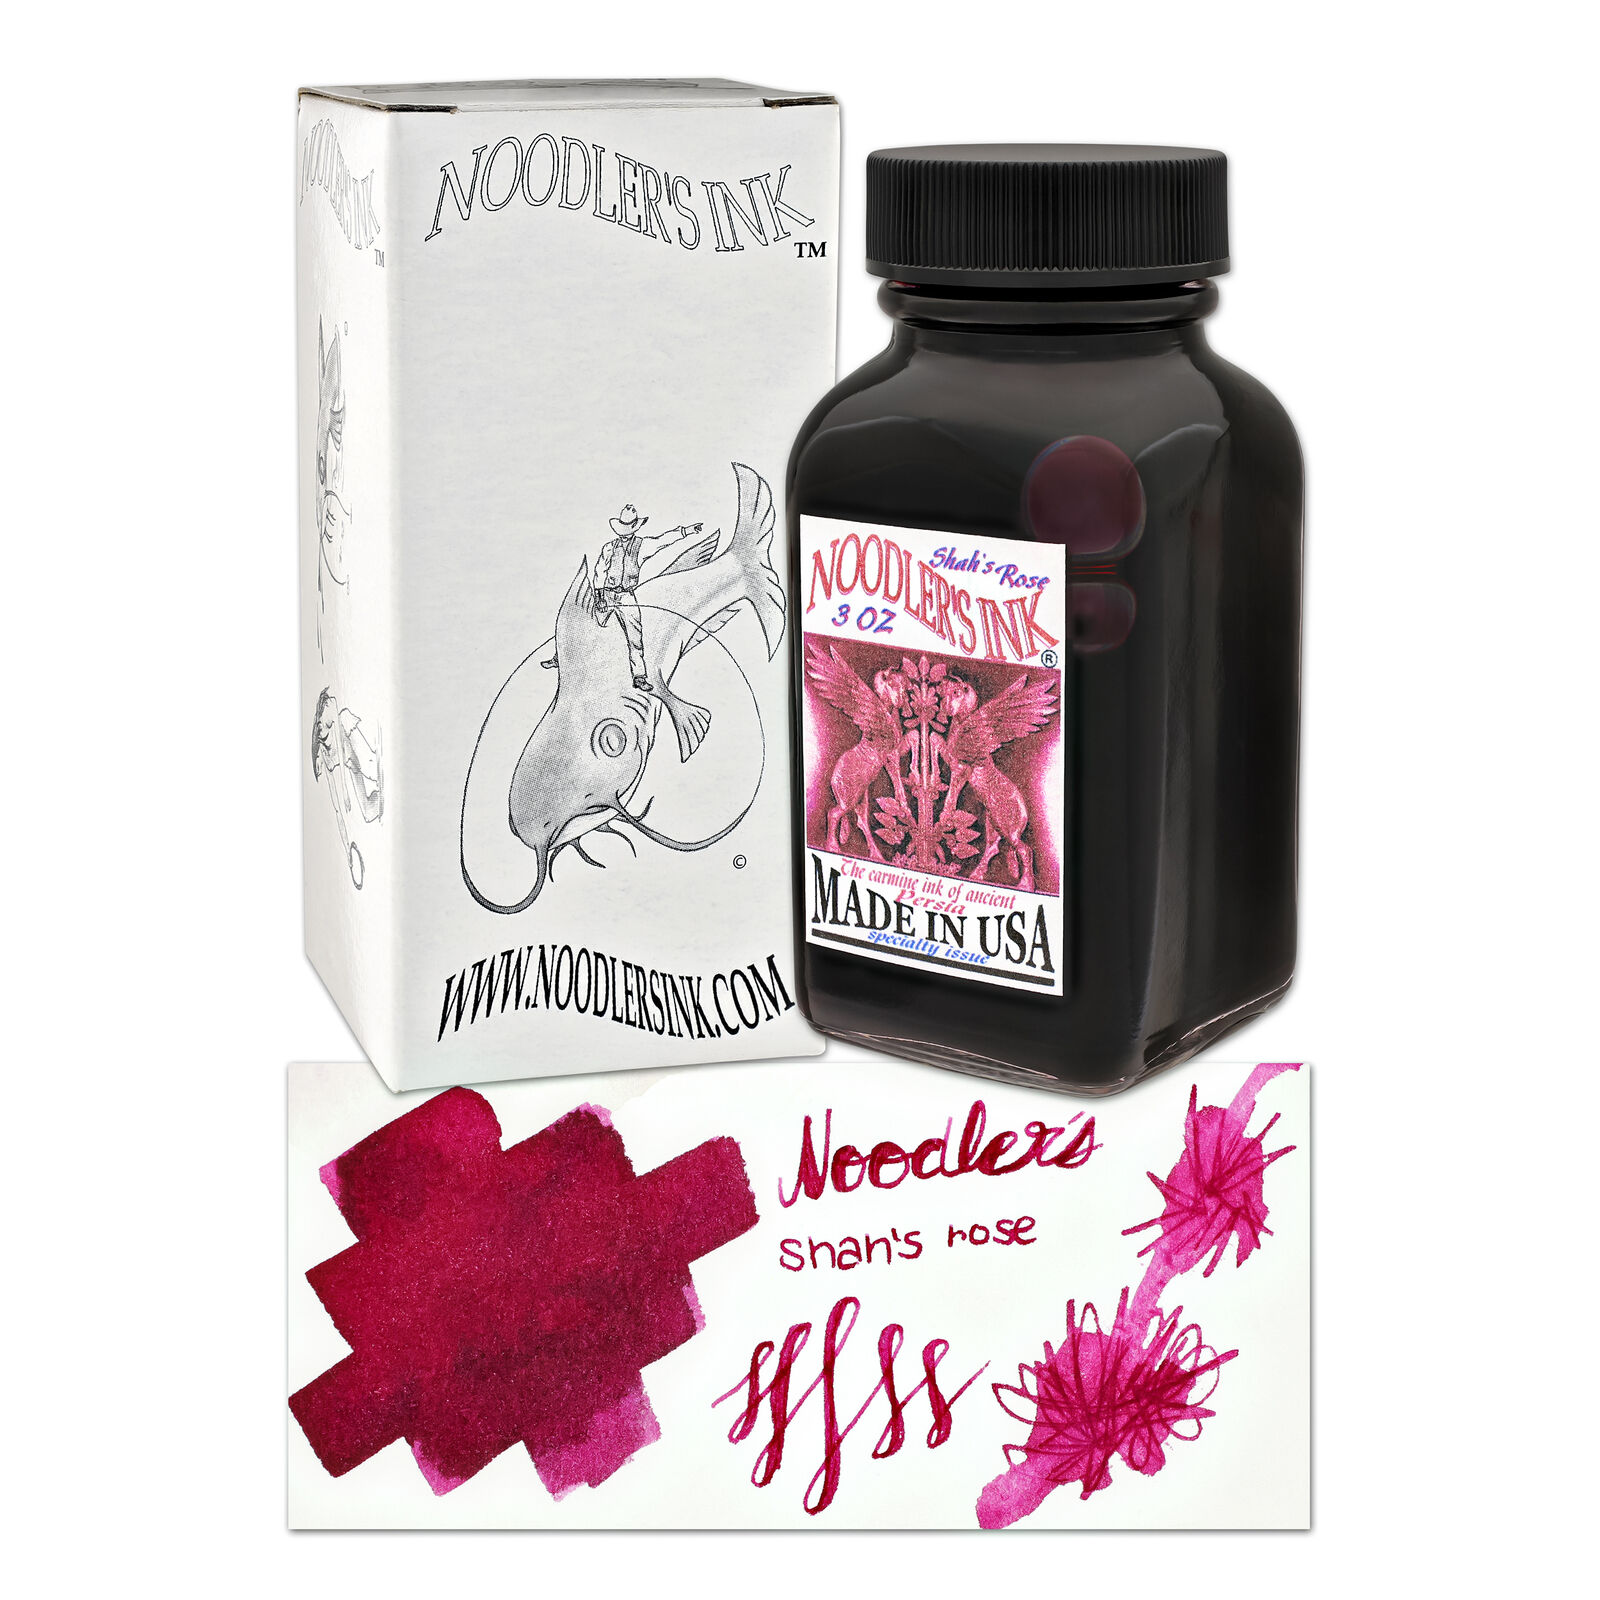 Noodler\'s Bottled Ink for Fountain Pens in Pearl Diver Coral - 3oz - NEW in Box